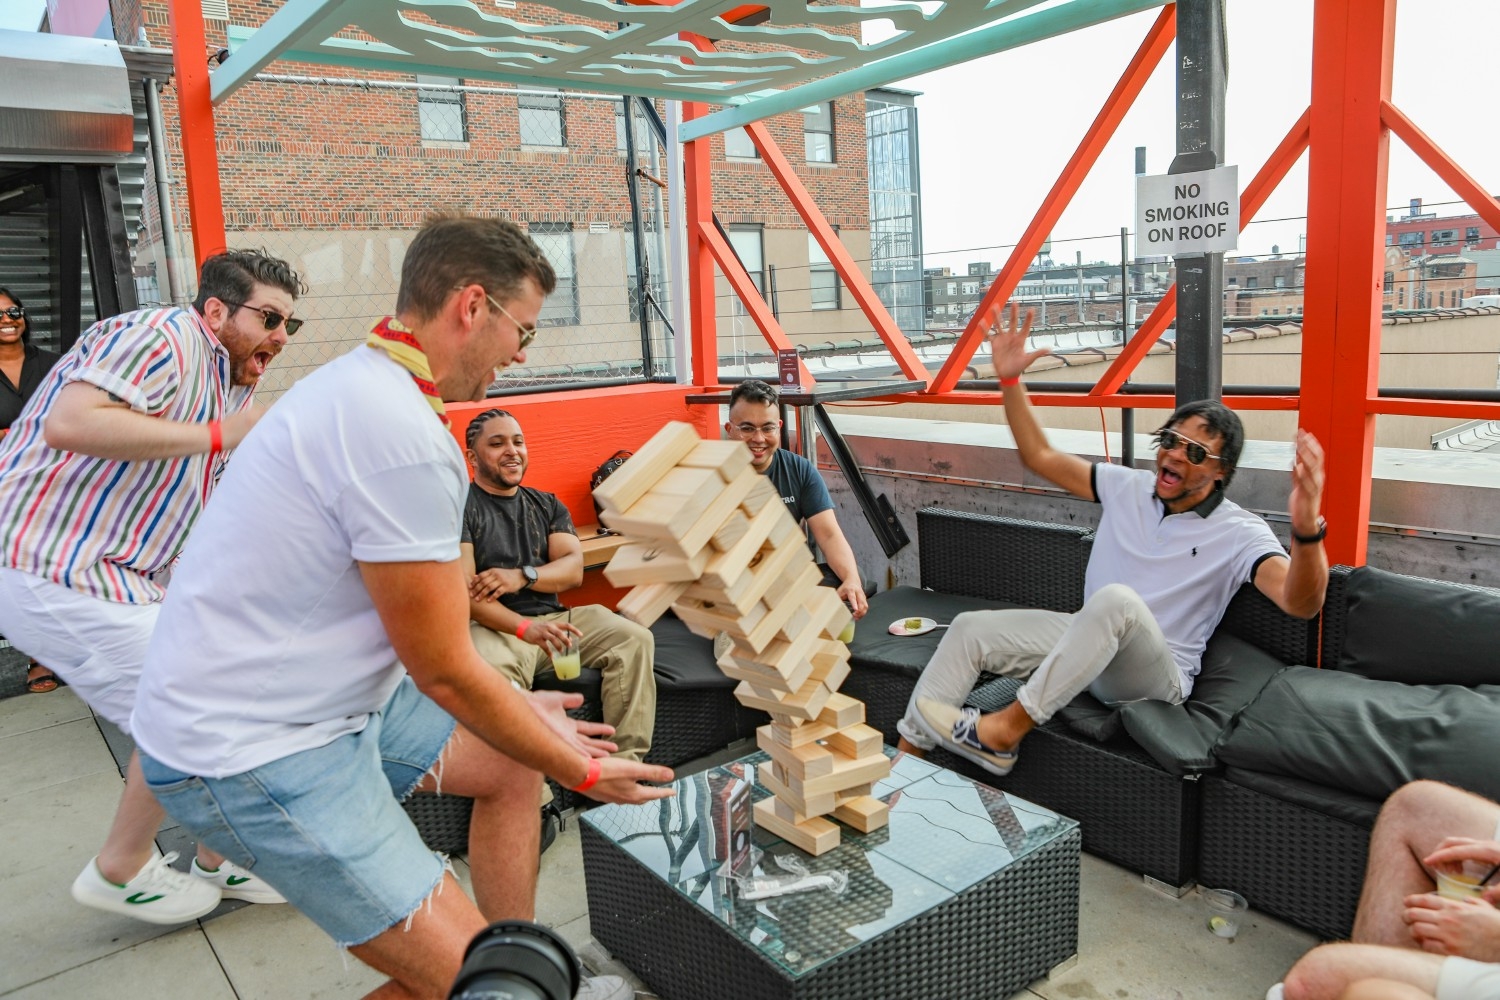 Giant Jenga at our rooftop summer Juneteenth Jubilee!